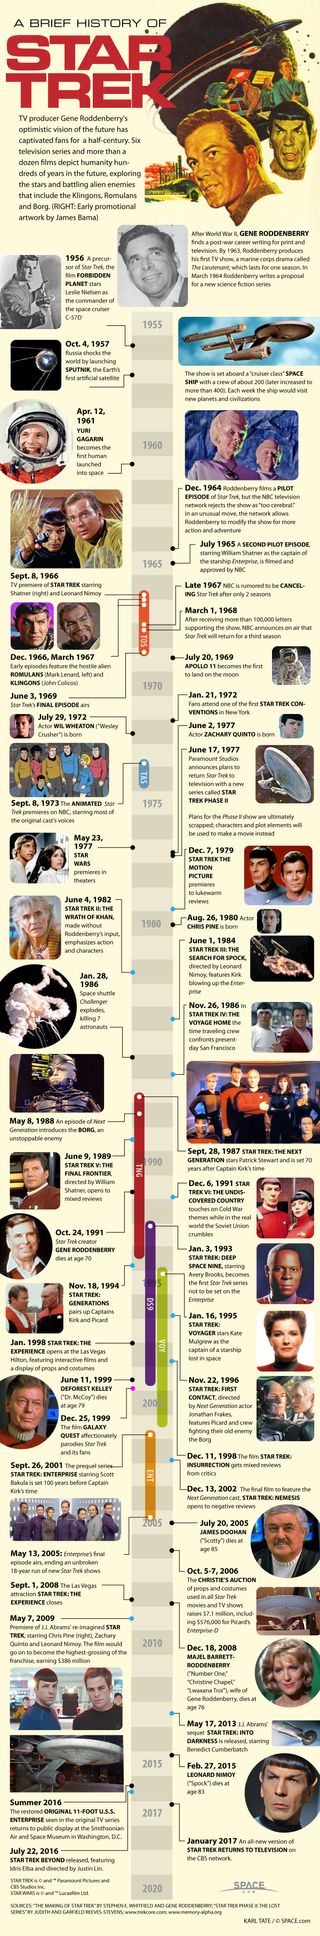 Infographic: Timeline of the Star Trek phenomenon on TV and in movies